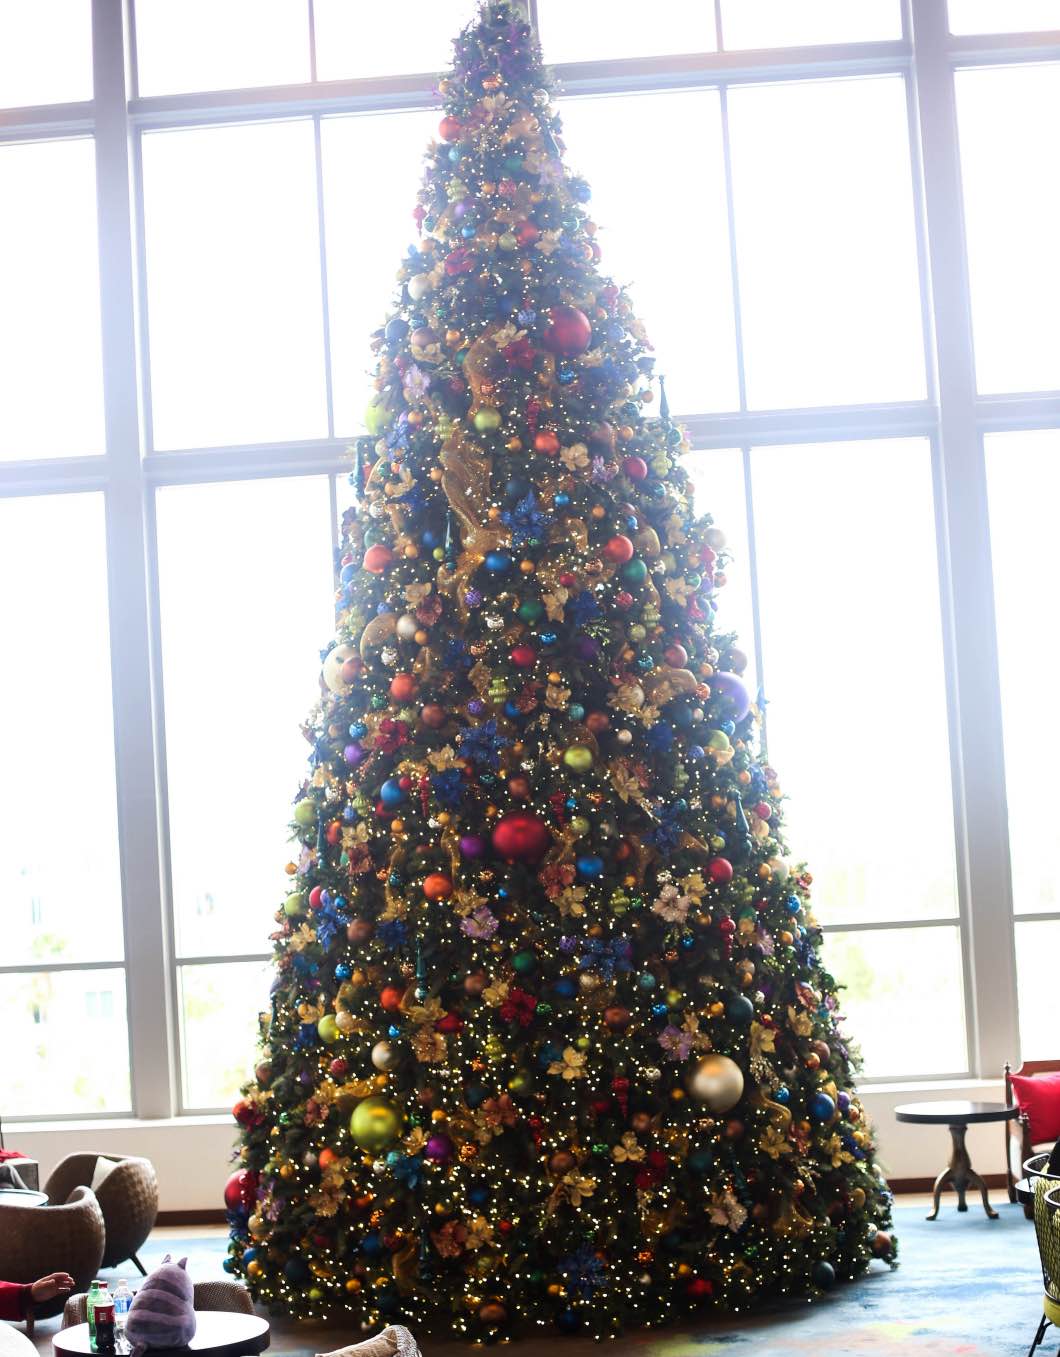 ChristmasTreeLoewsSapphire - Holiday Attractions in Orlando by Atlanta travel blogger Happily Hughes